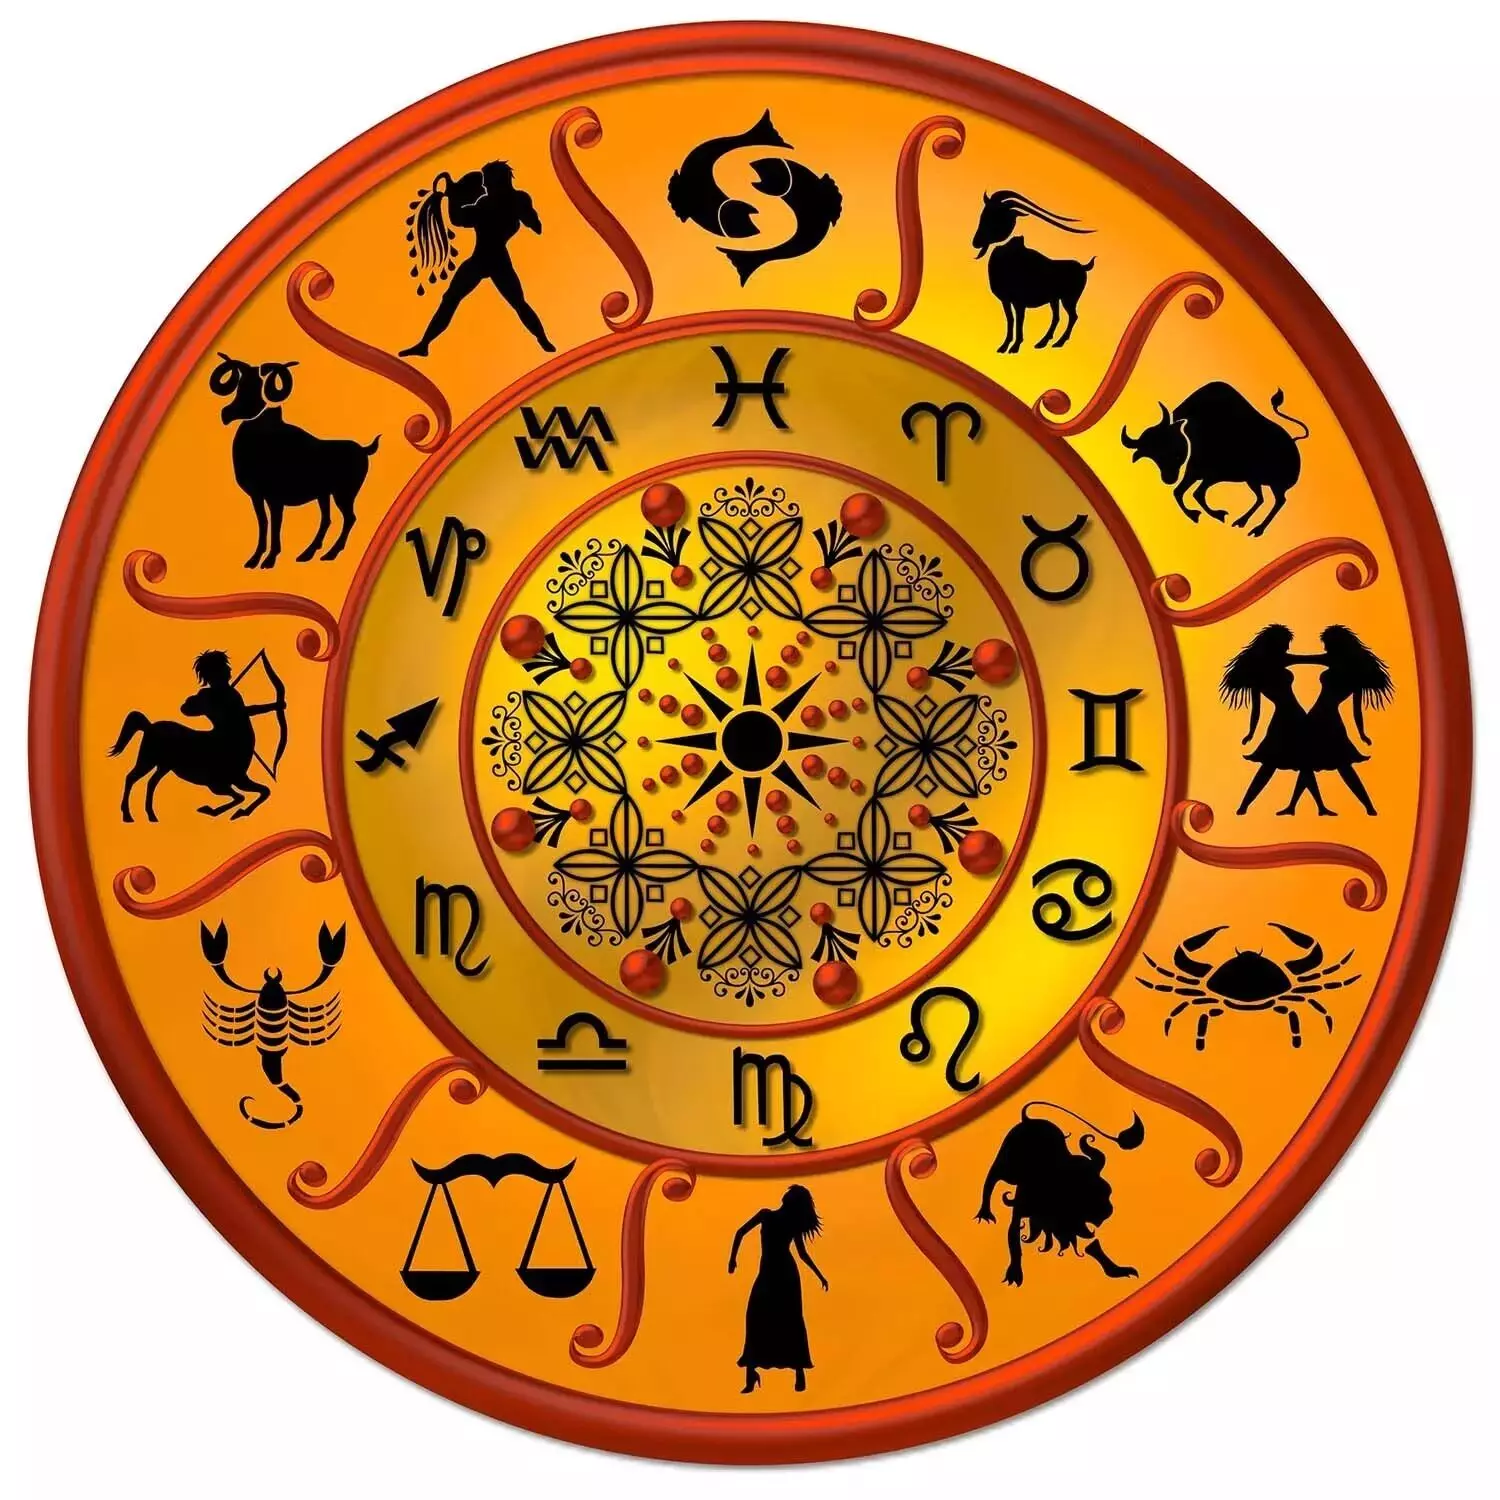 04  October  – Know your todays horoscope